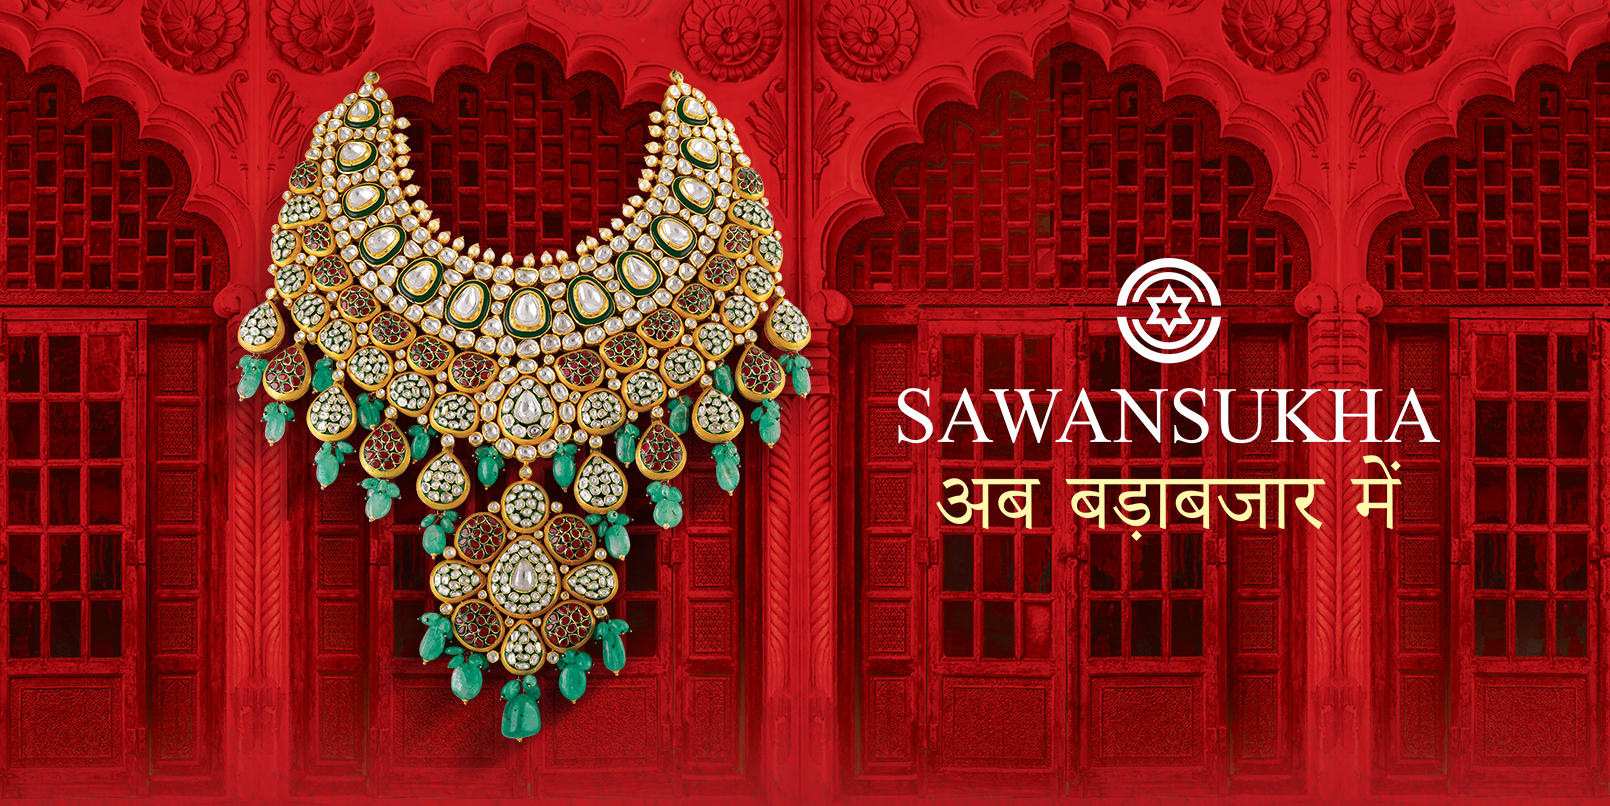 The Rich Heritage Of Sawansukha Is Now At Burra Bazar